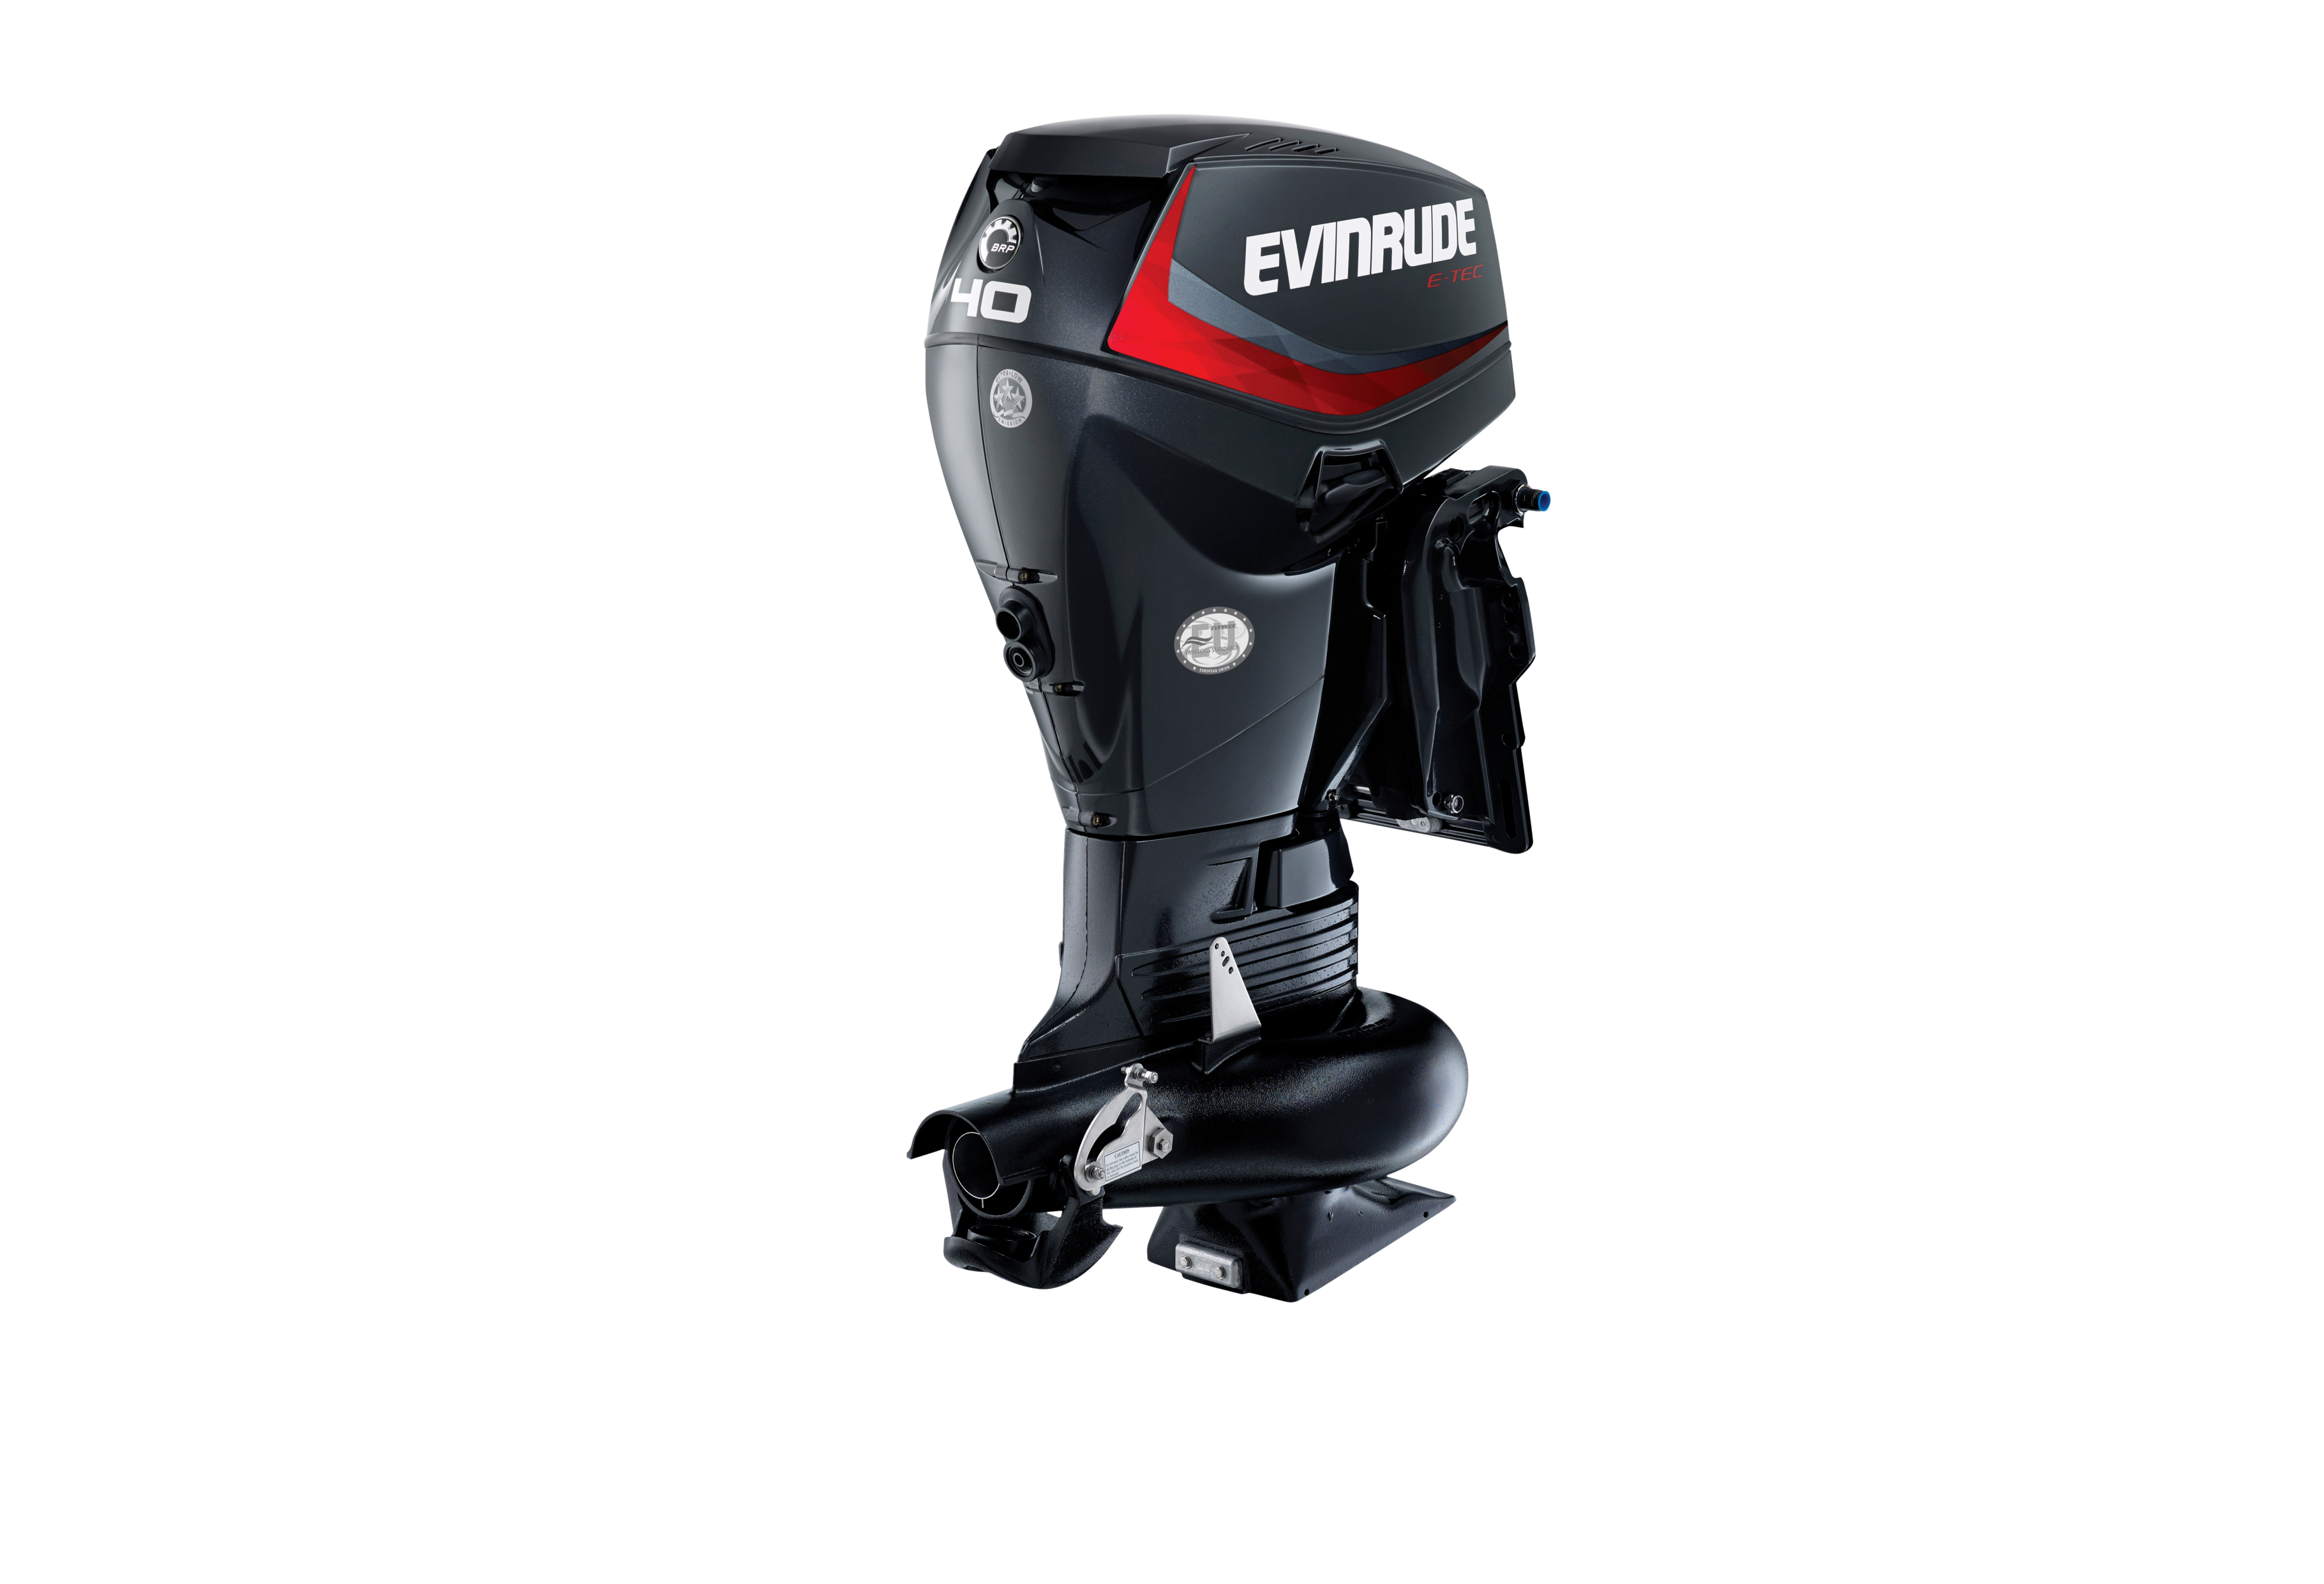 40 Hp Jet Series Boat Motor by Evinrude